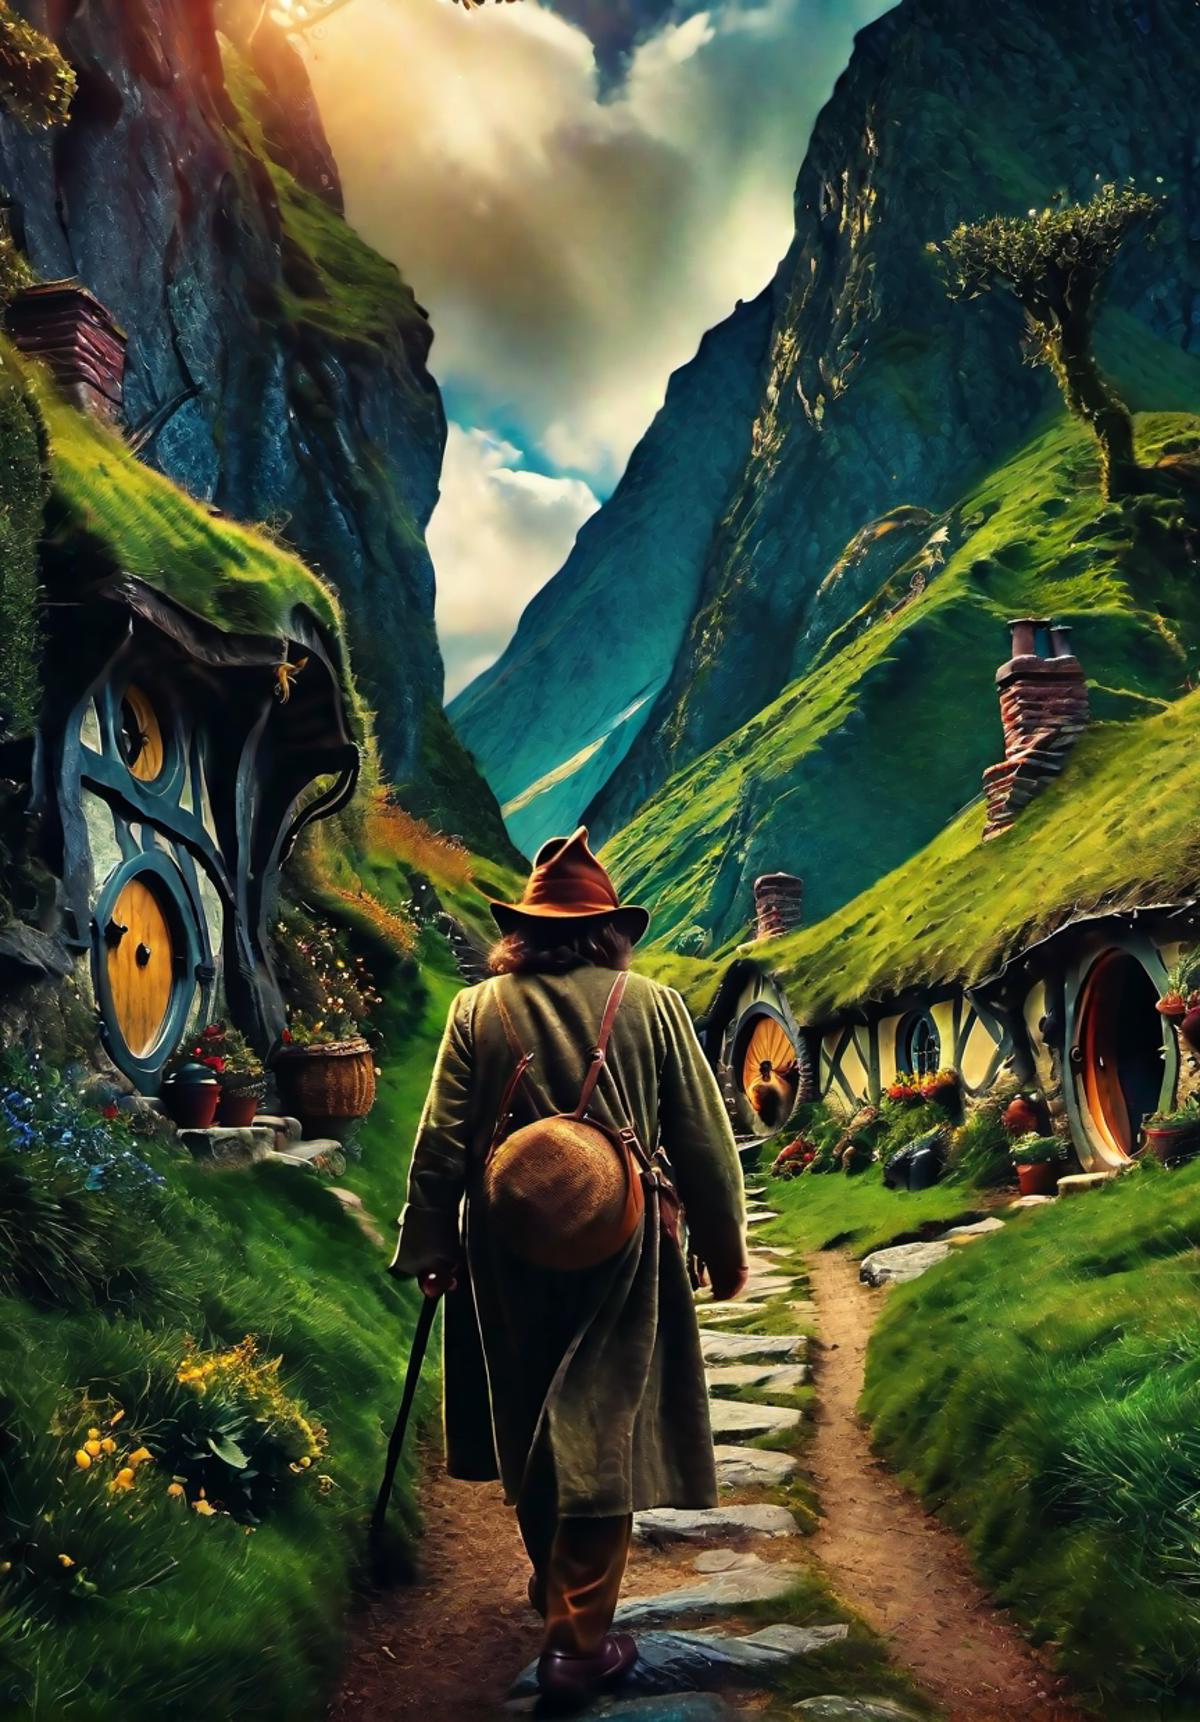 A man carrying a brown bag and walking towards hobbit homes in the mountains.